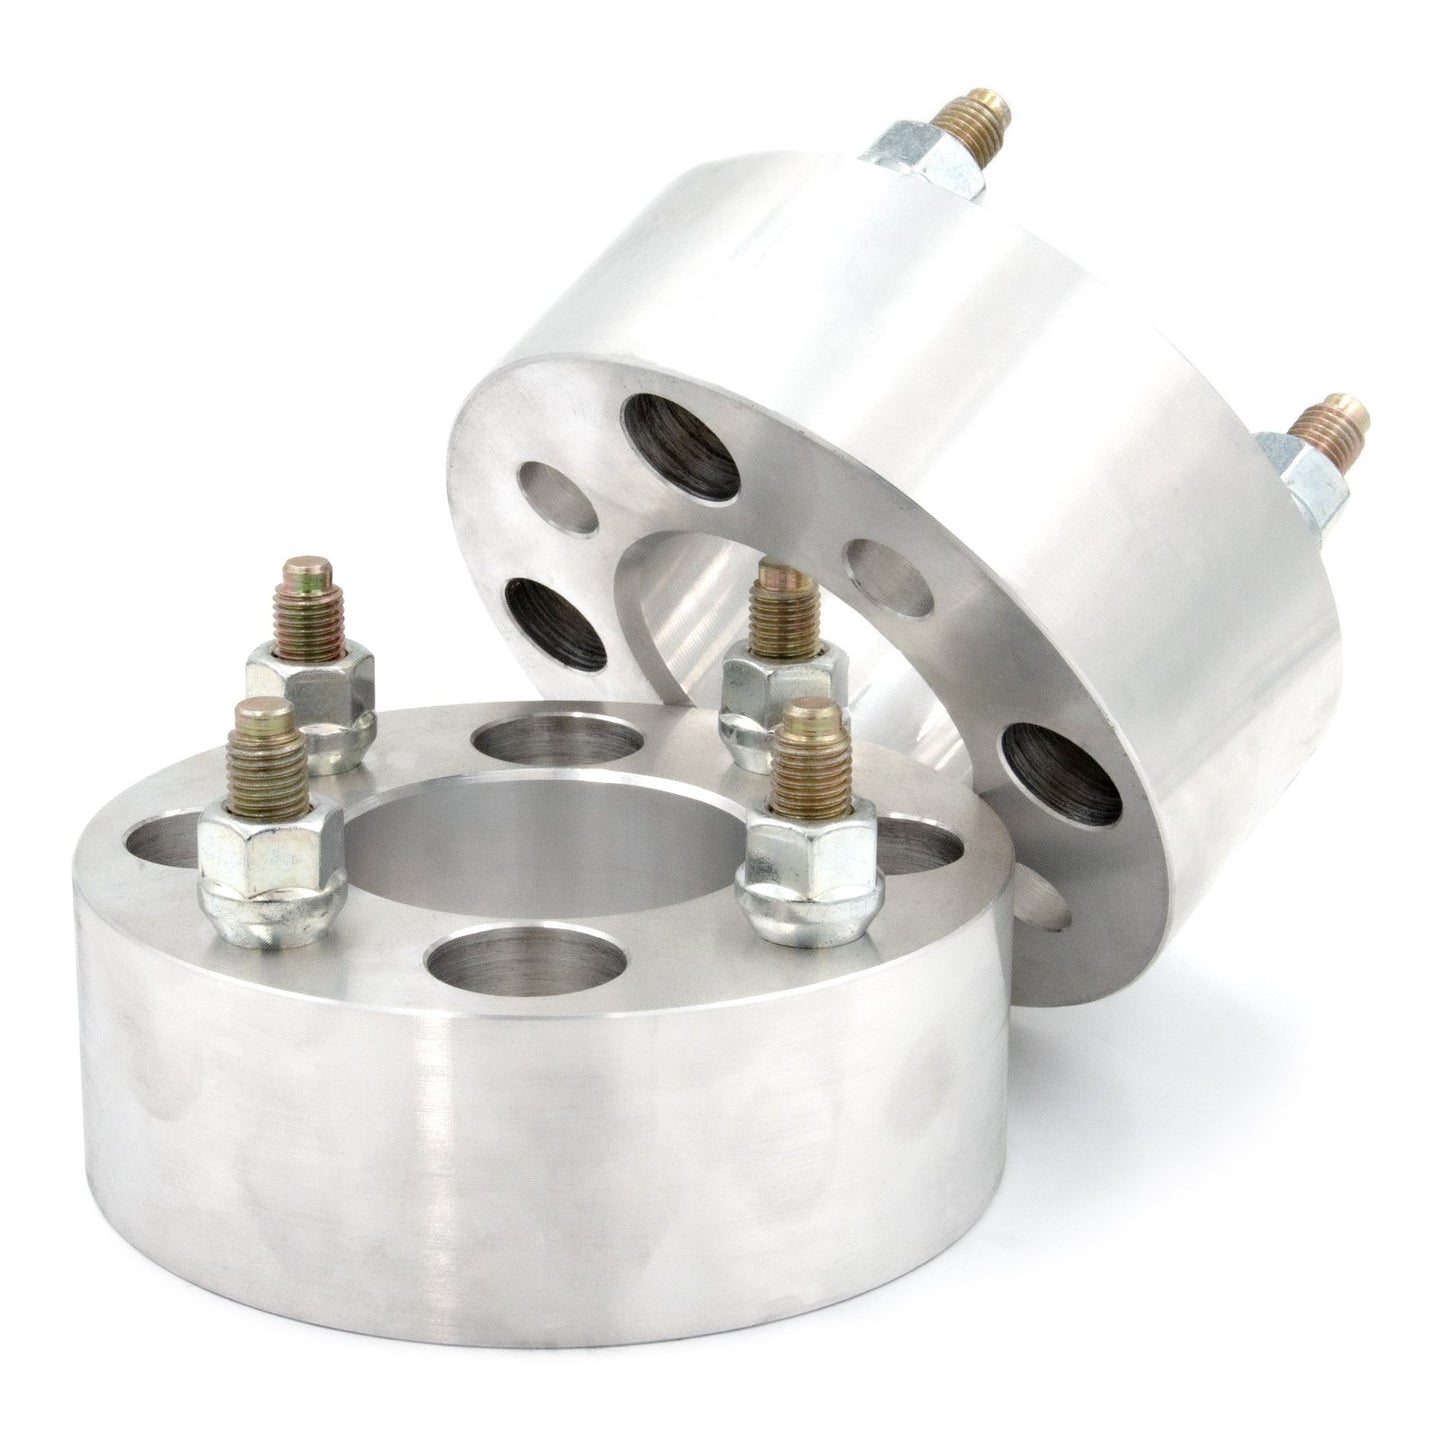 4x125 to 4x110 Wheel Spacer/Adapter - Thickness: 3/4"- 4"